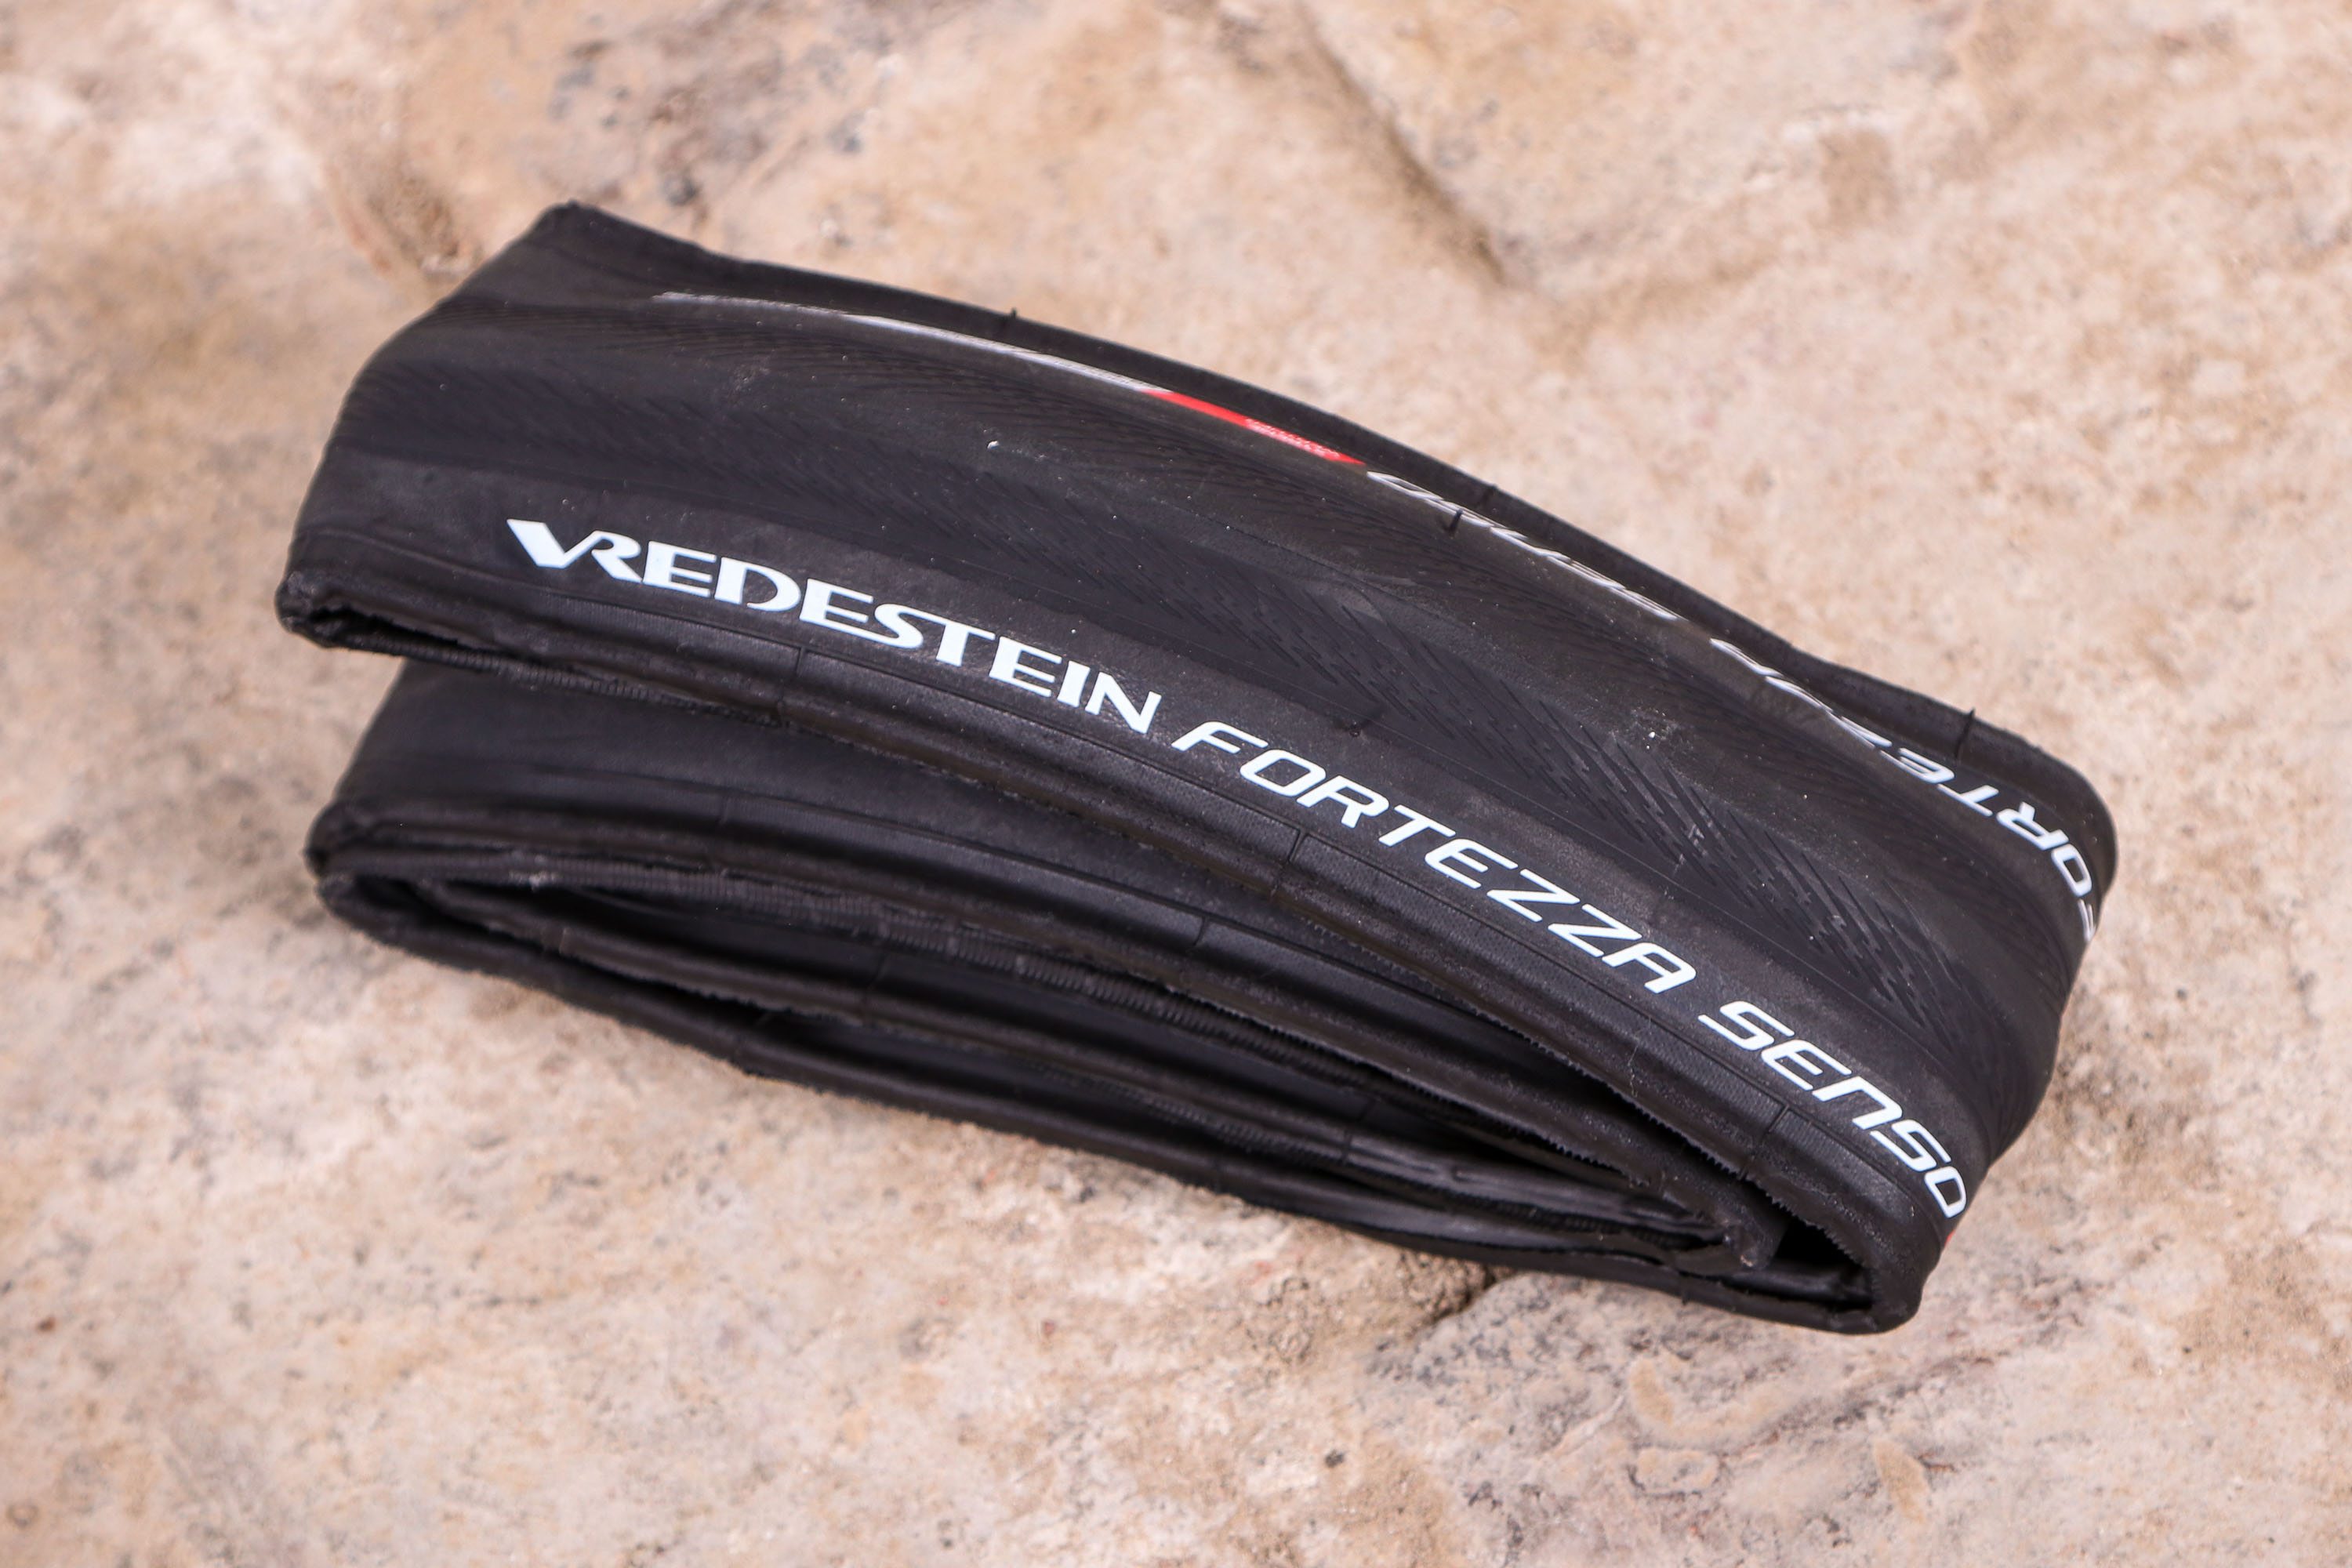 Review: Vredestein Xtreme Weather tyre | road.cc